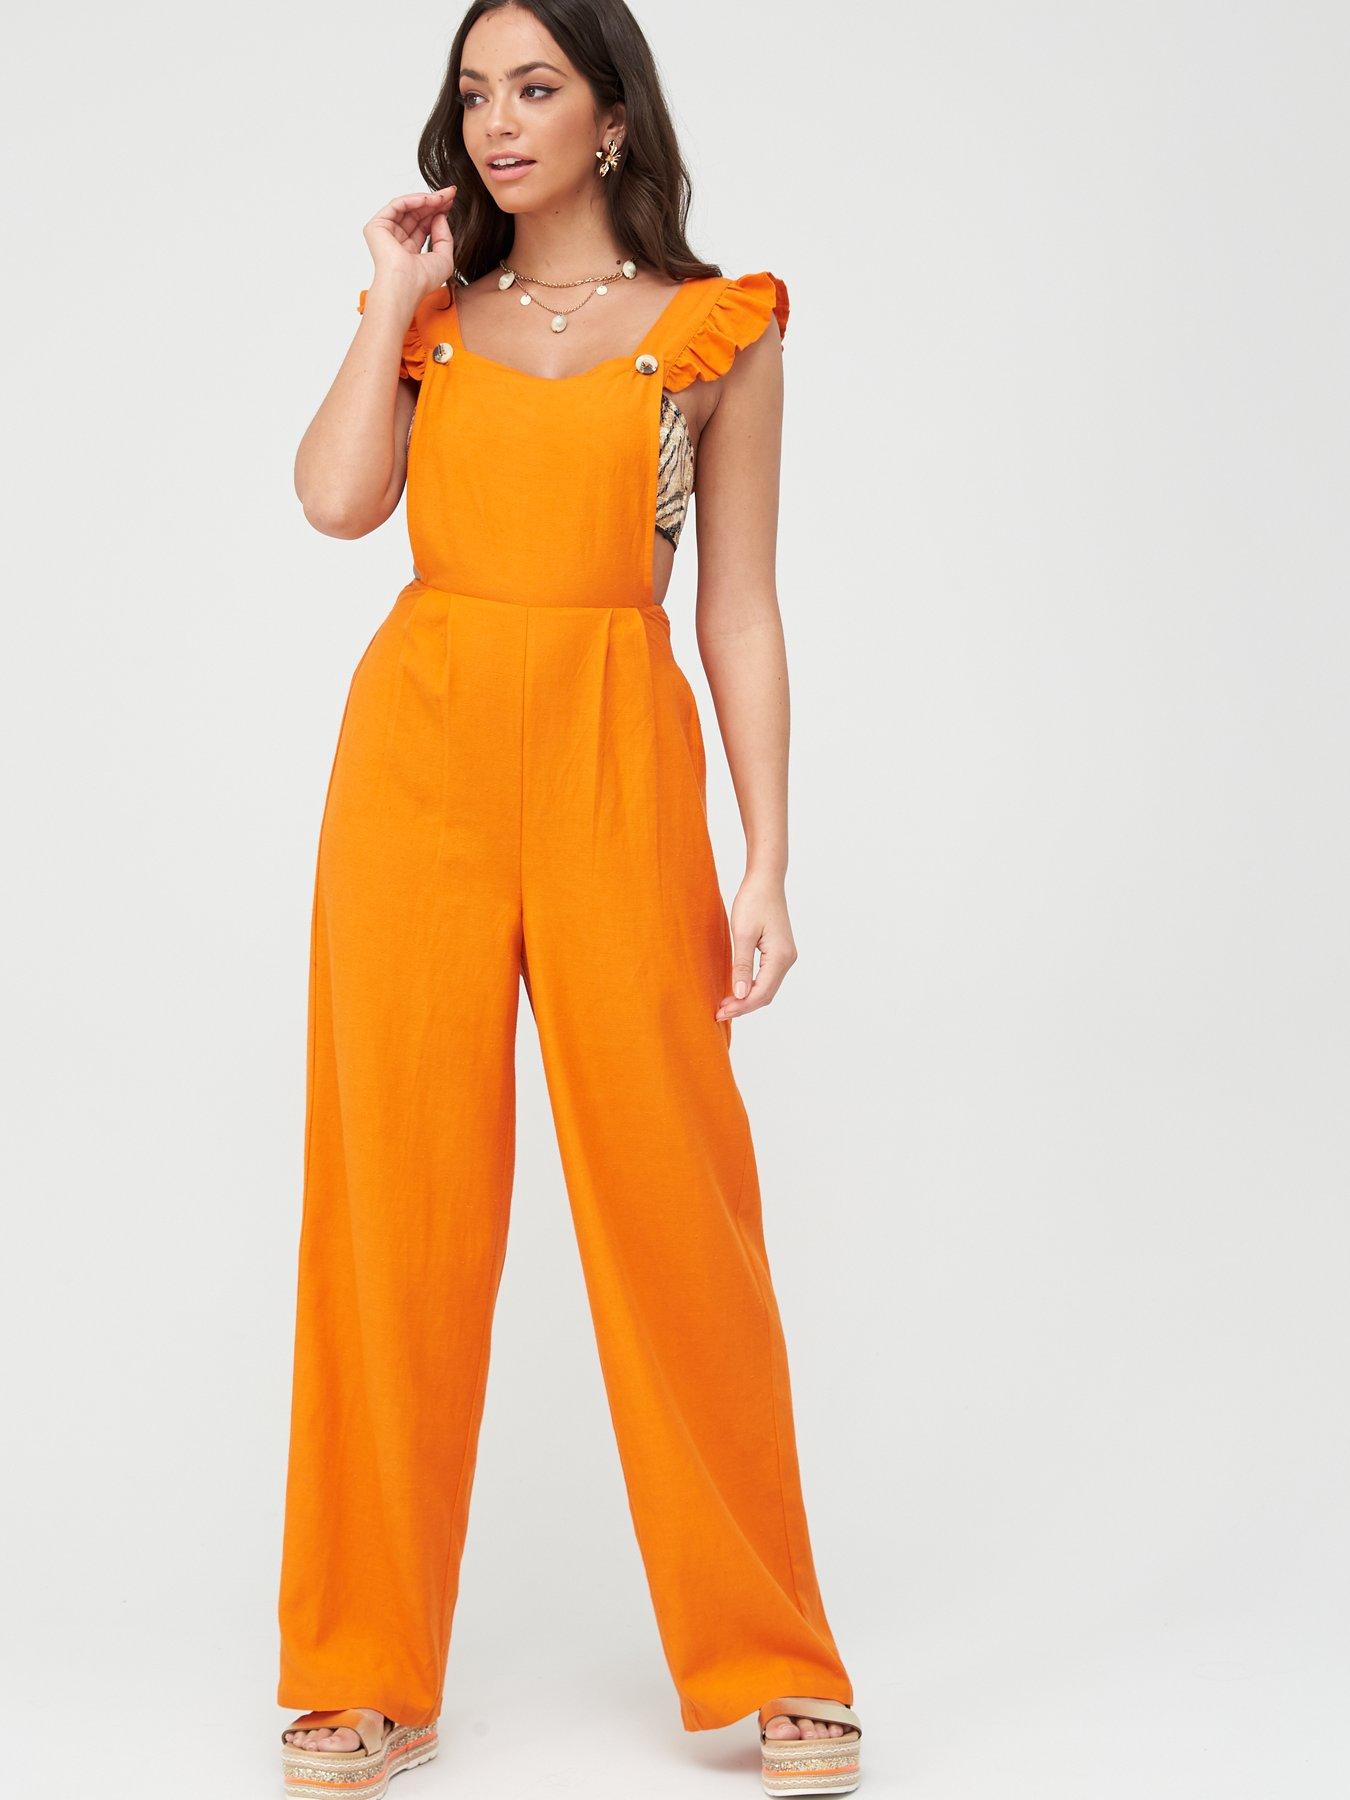 really cute jumpsuits